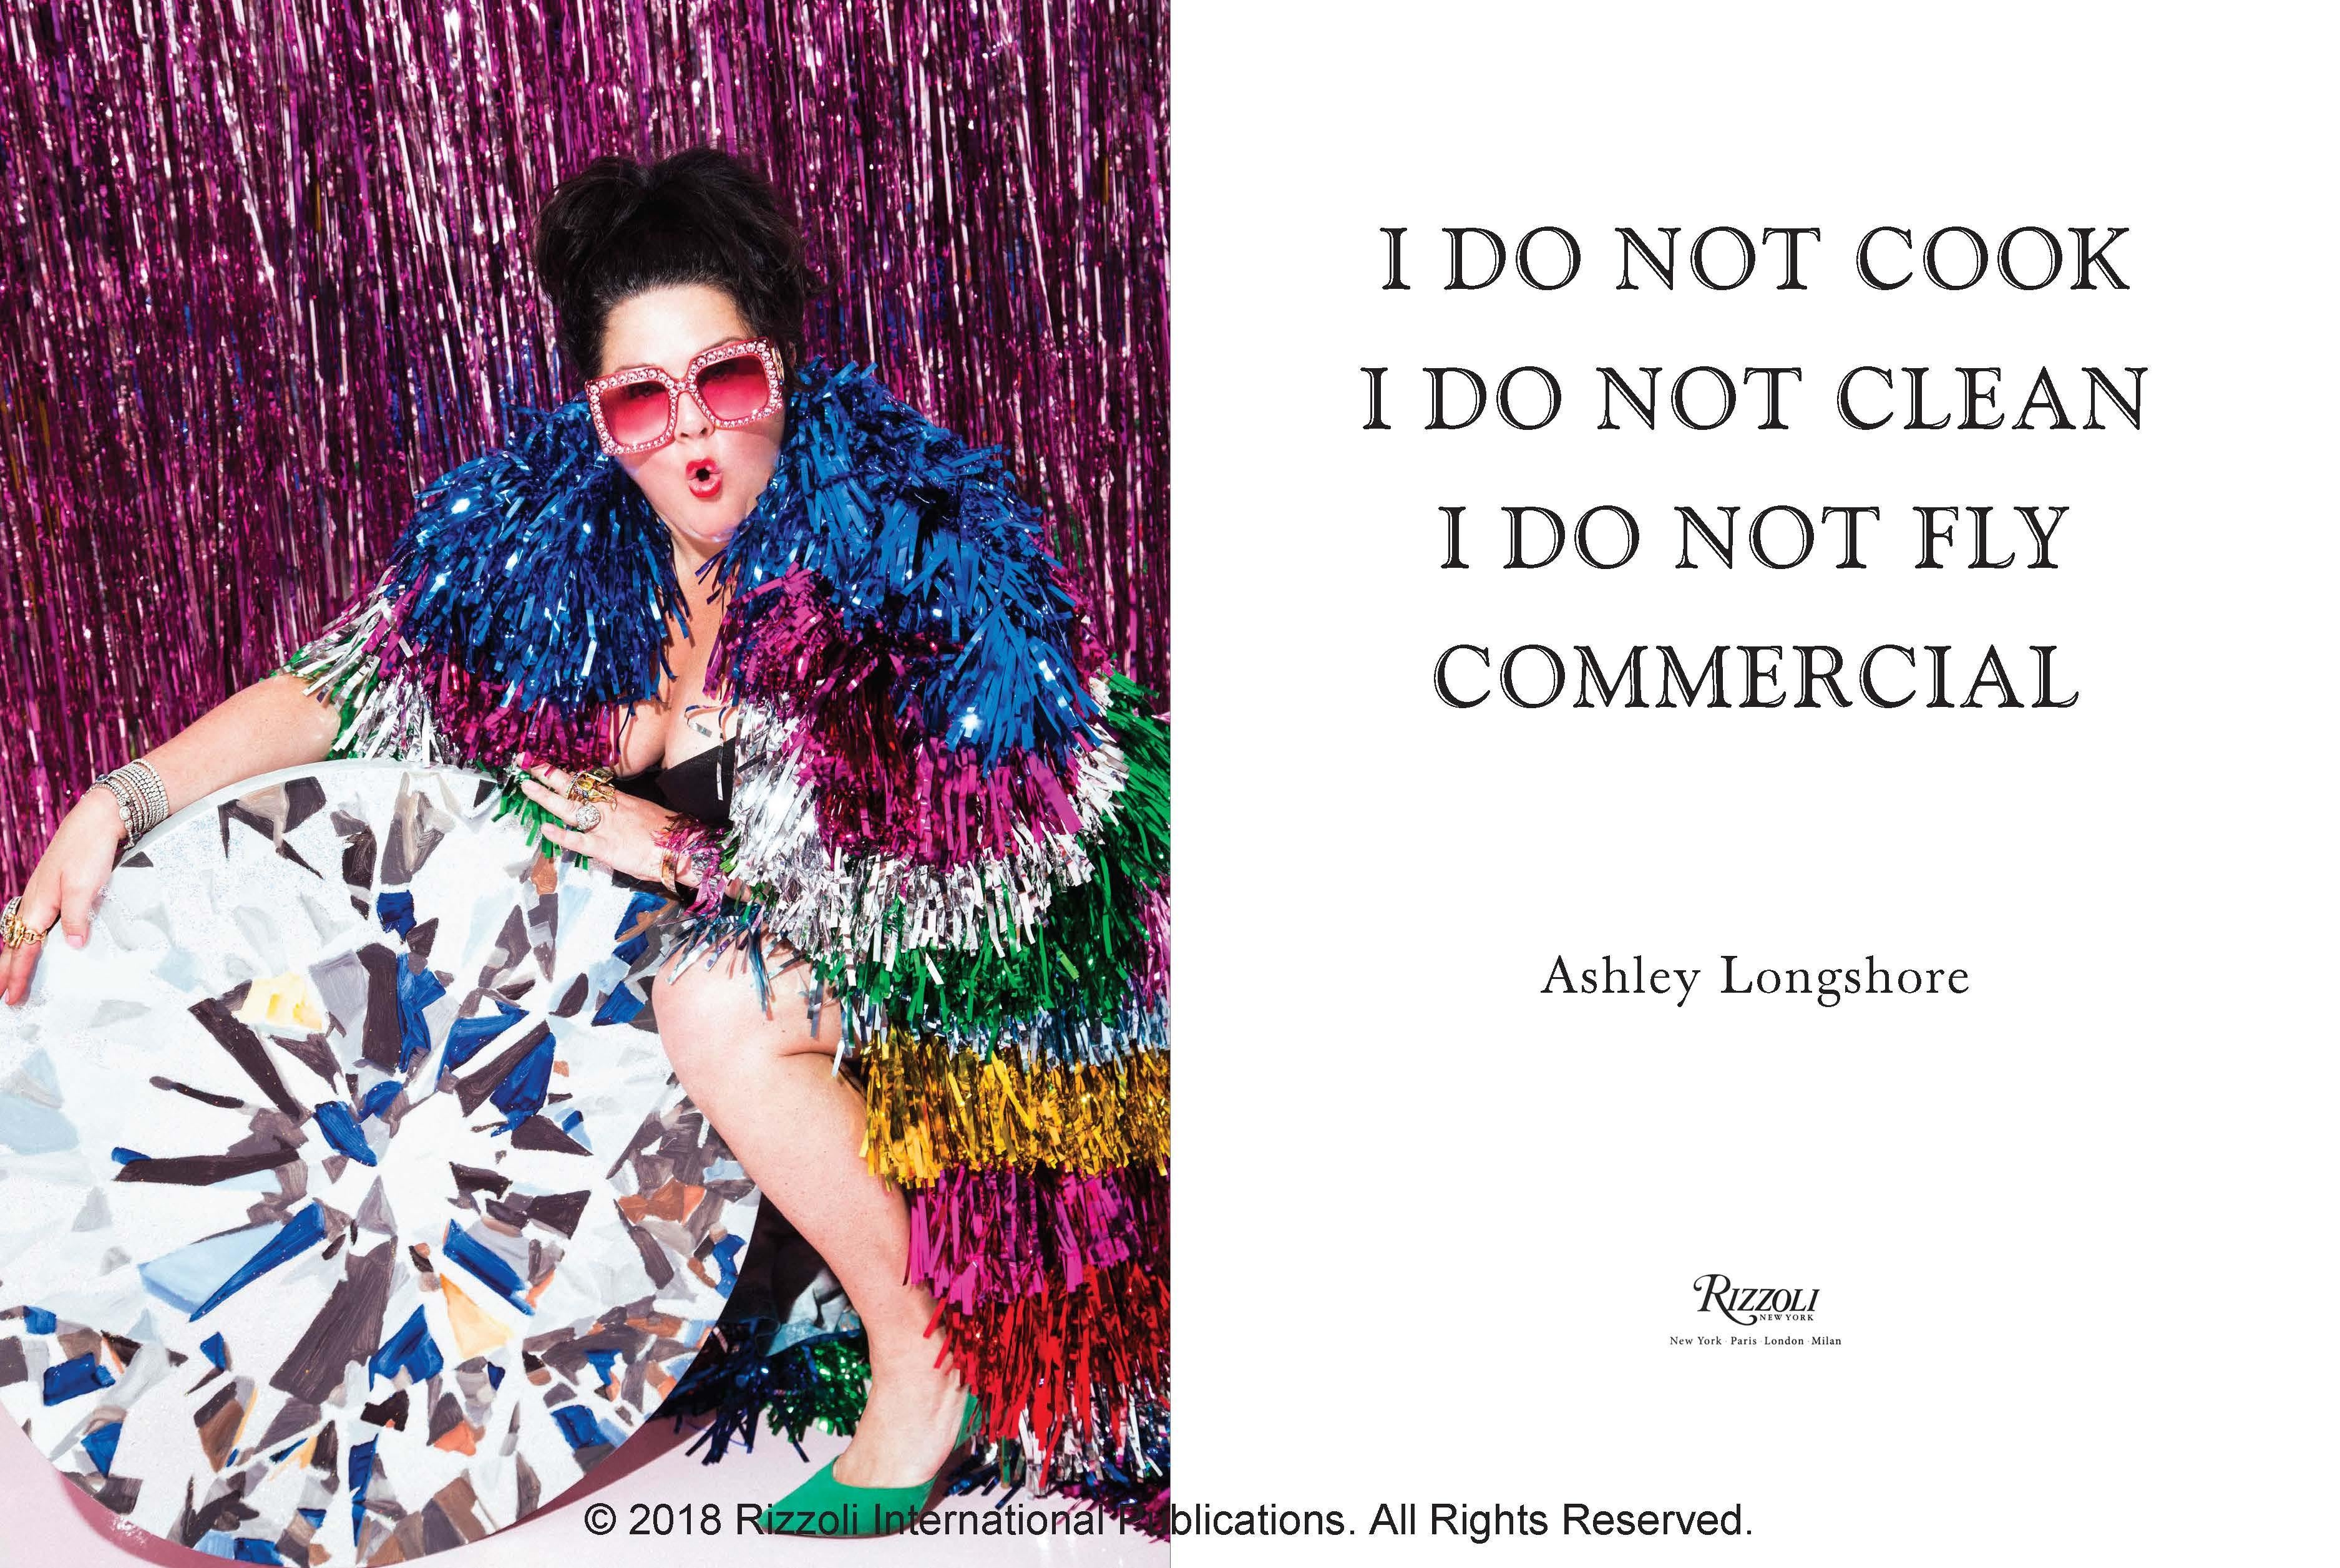 Ashley Longshore: I Do Not Cook, I Do Not Clean, I Do Not Fly Commercial
Author Ashley Longshore, Contributions by Linda Fargo and Blake Lively and Diane von Furstenberg and Tommy Hilfiger

New Orleans-based self-taught pop artist Ashley